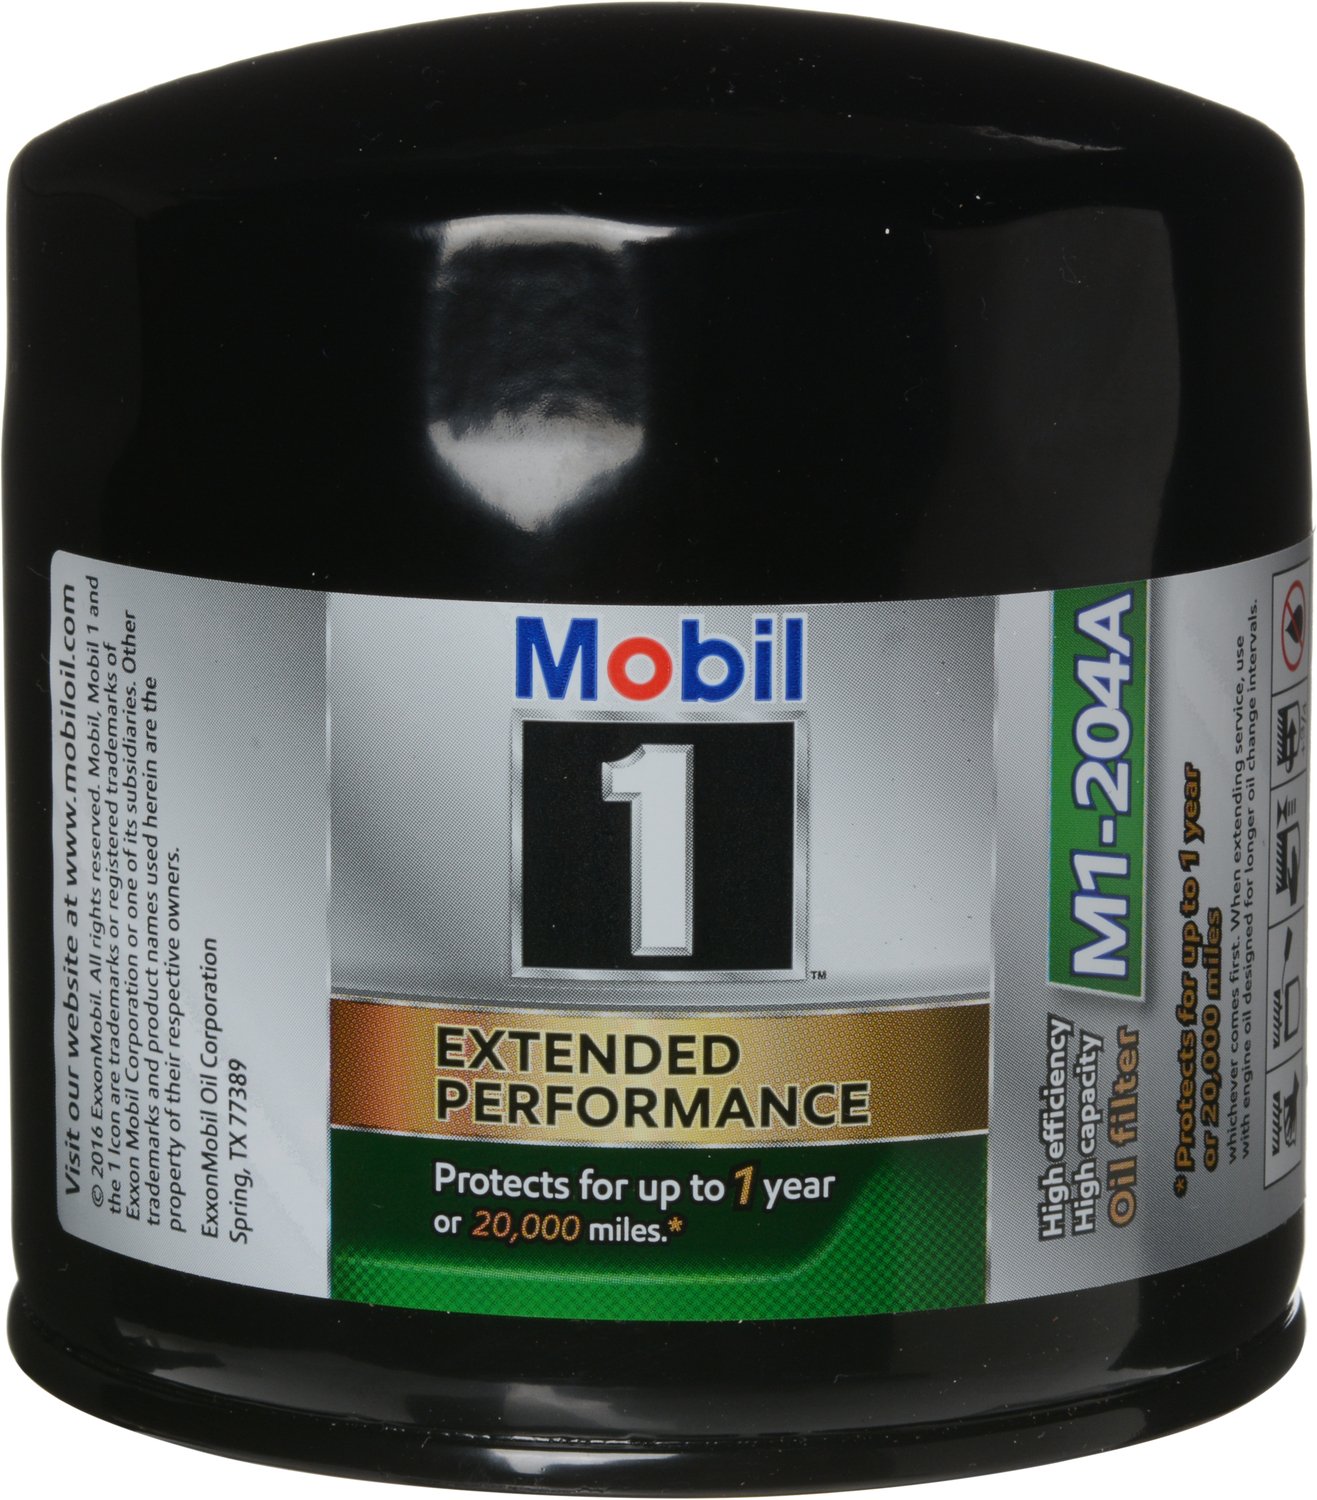 Mobil 1 M1-204A Extended Performance Oil Filter, Pack of 2  - Like New